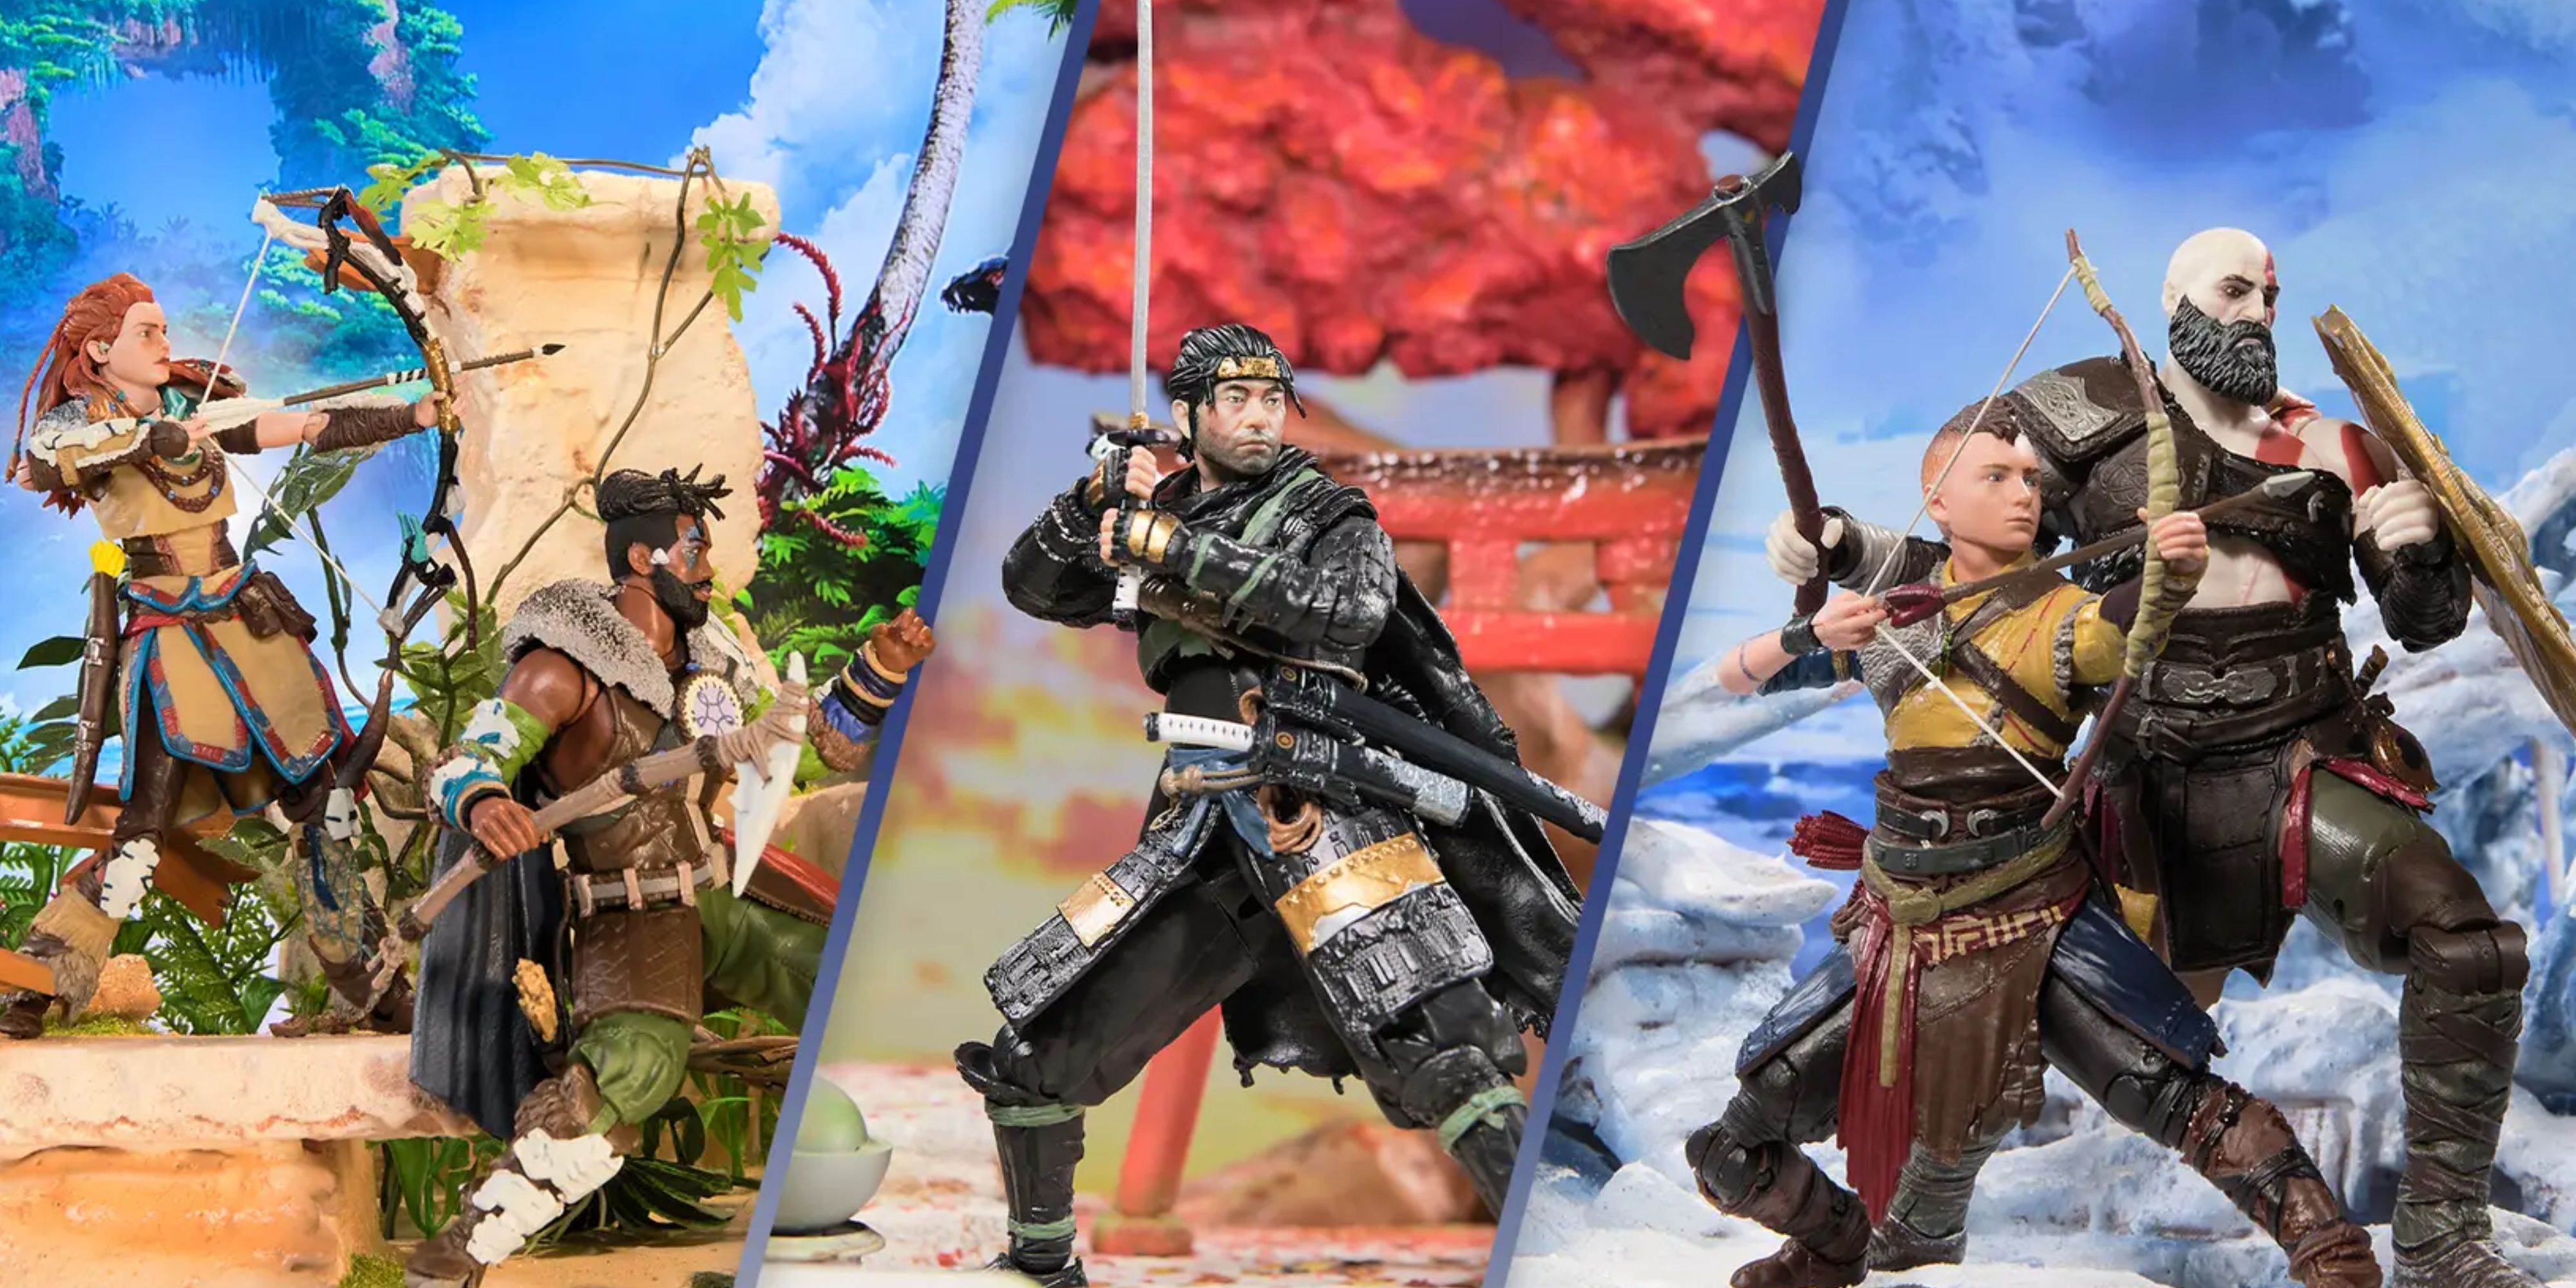 PlayStation unveils new action figure series featuring some of the biggest names